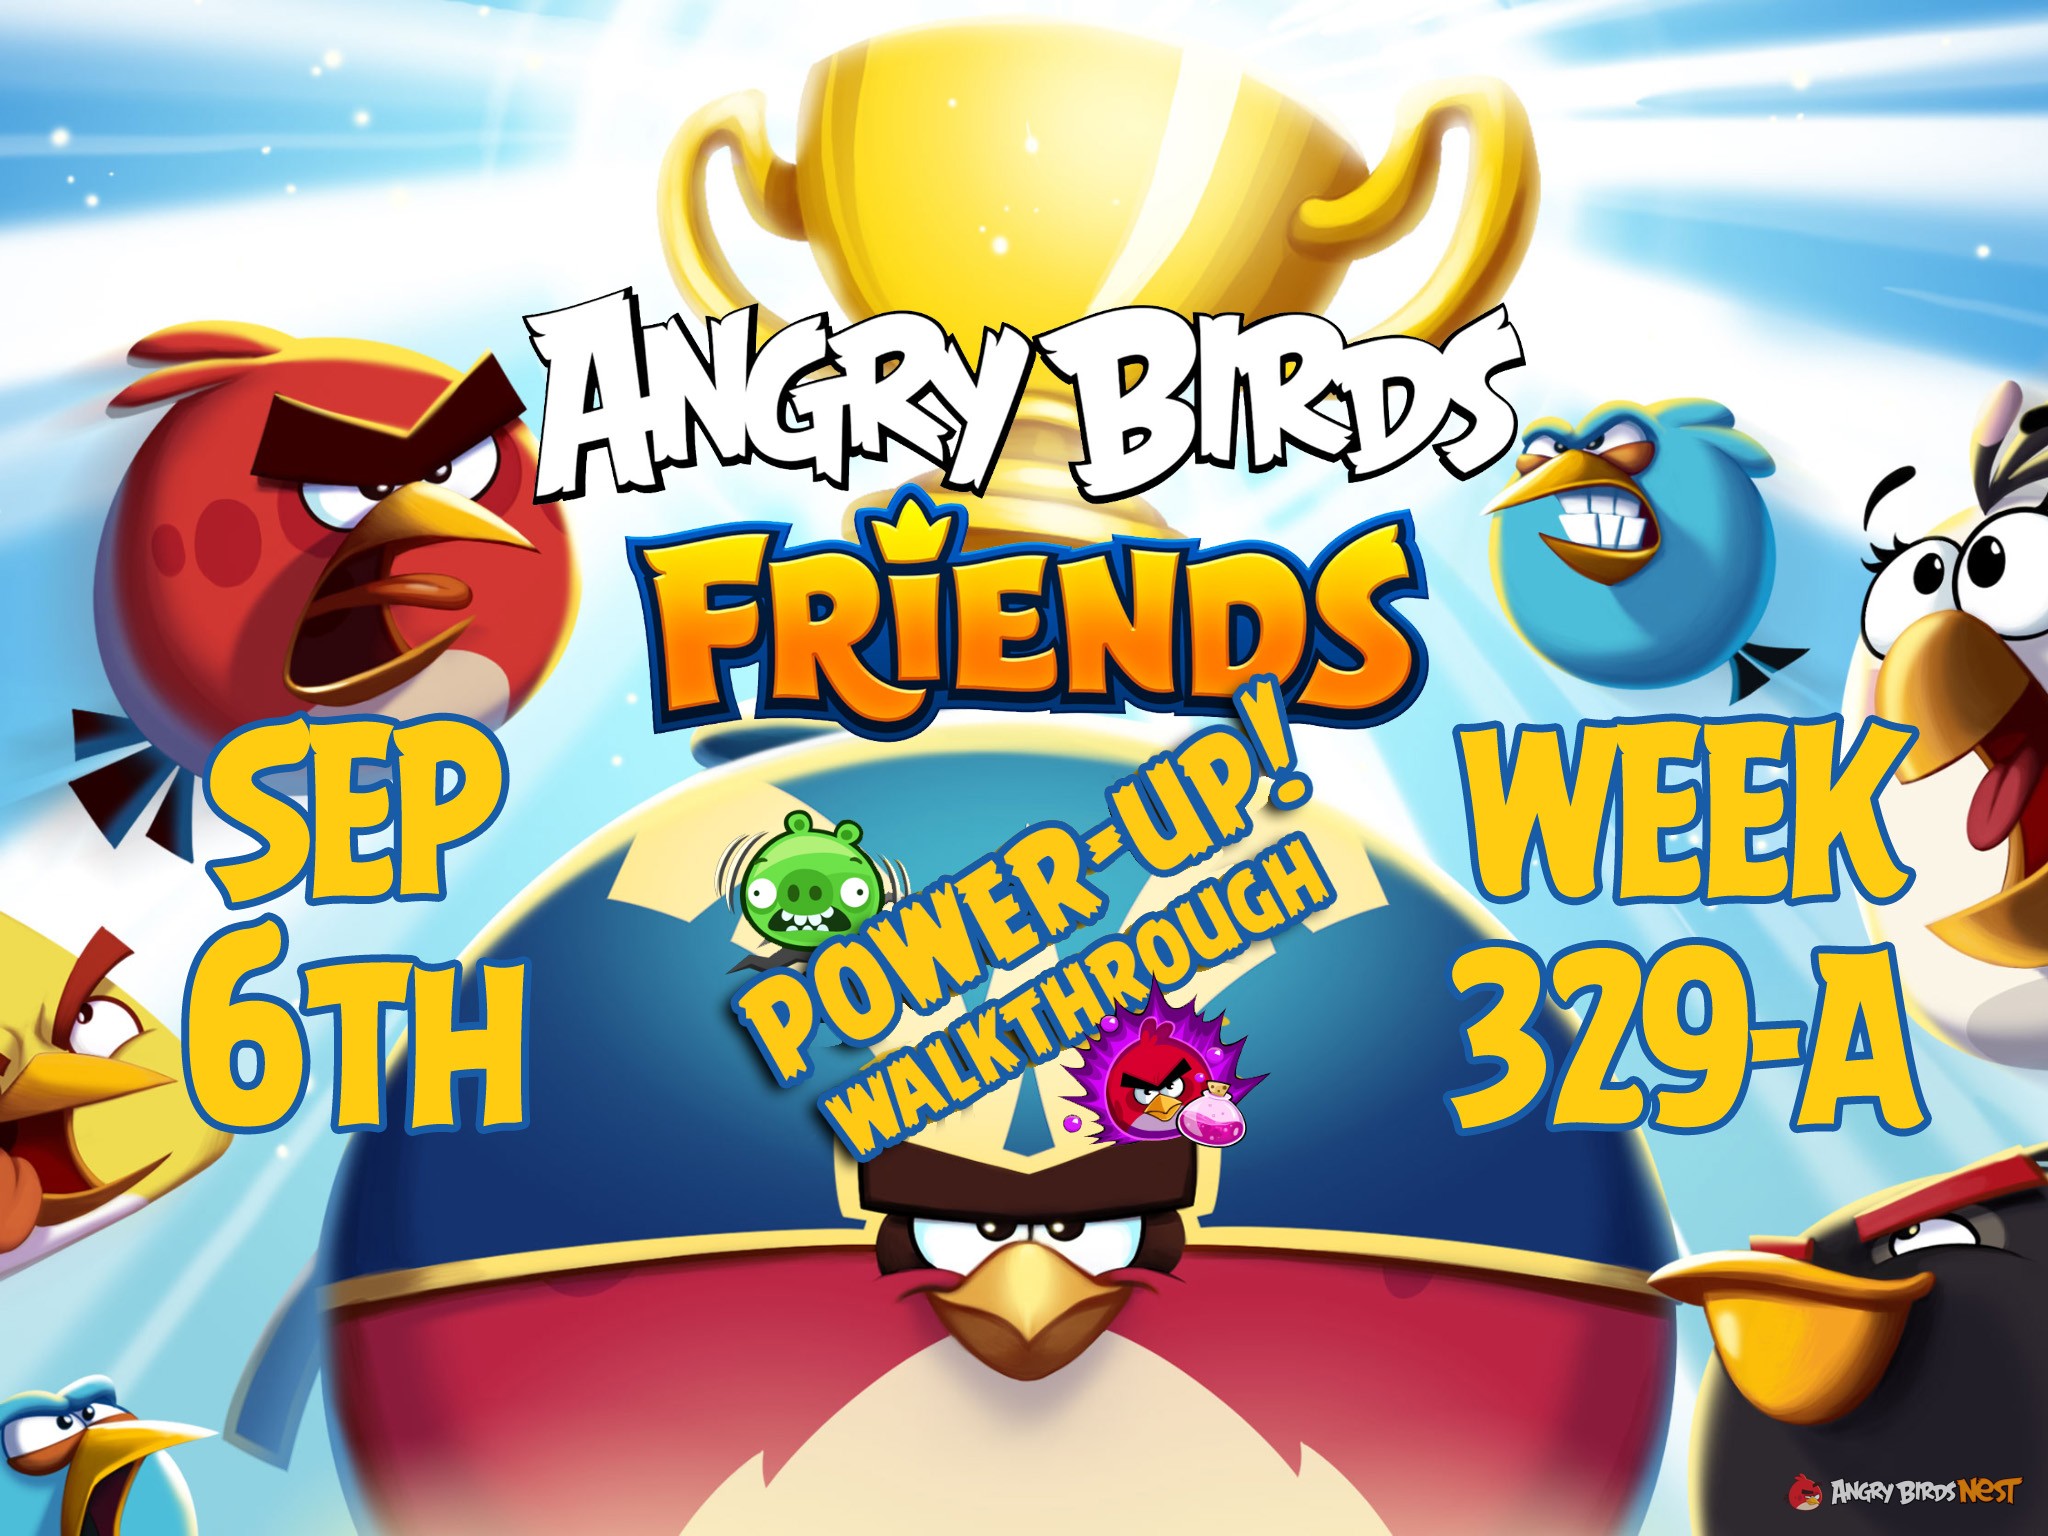 Angry-Birds-Friends-Tournament-Week-329-A-Feature-Image-PU